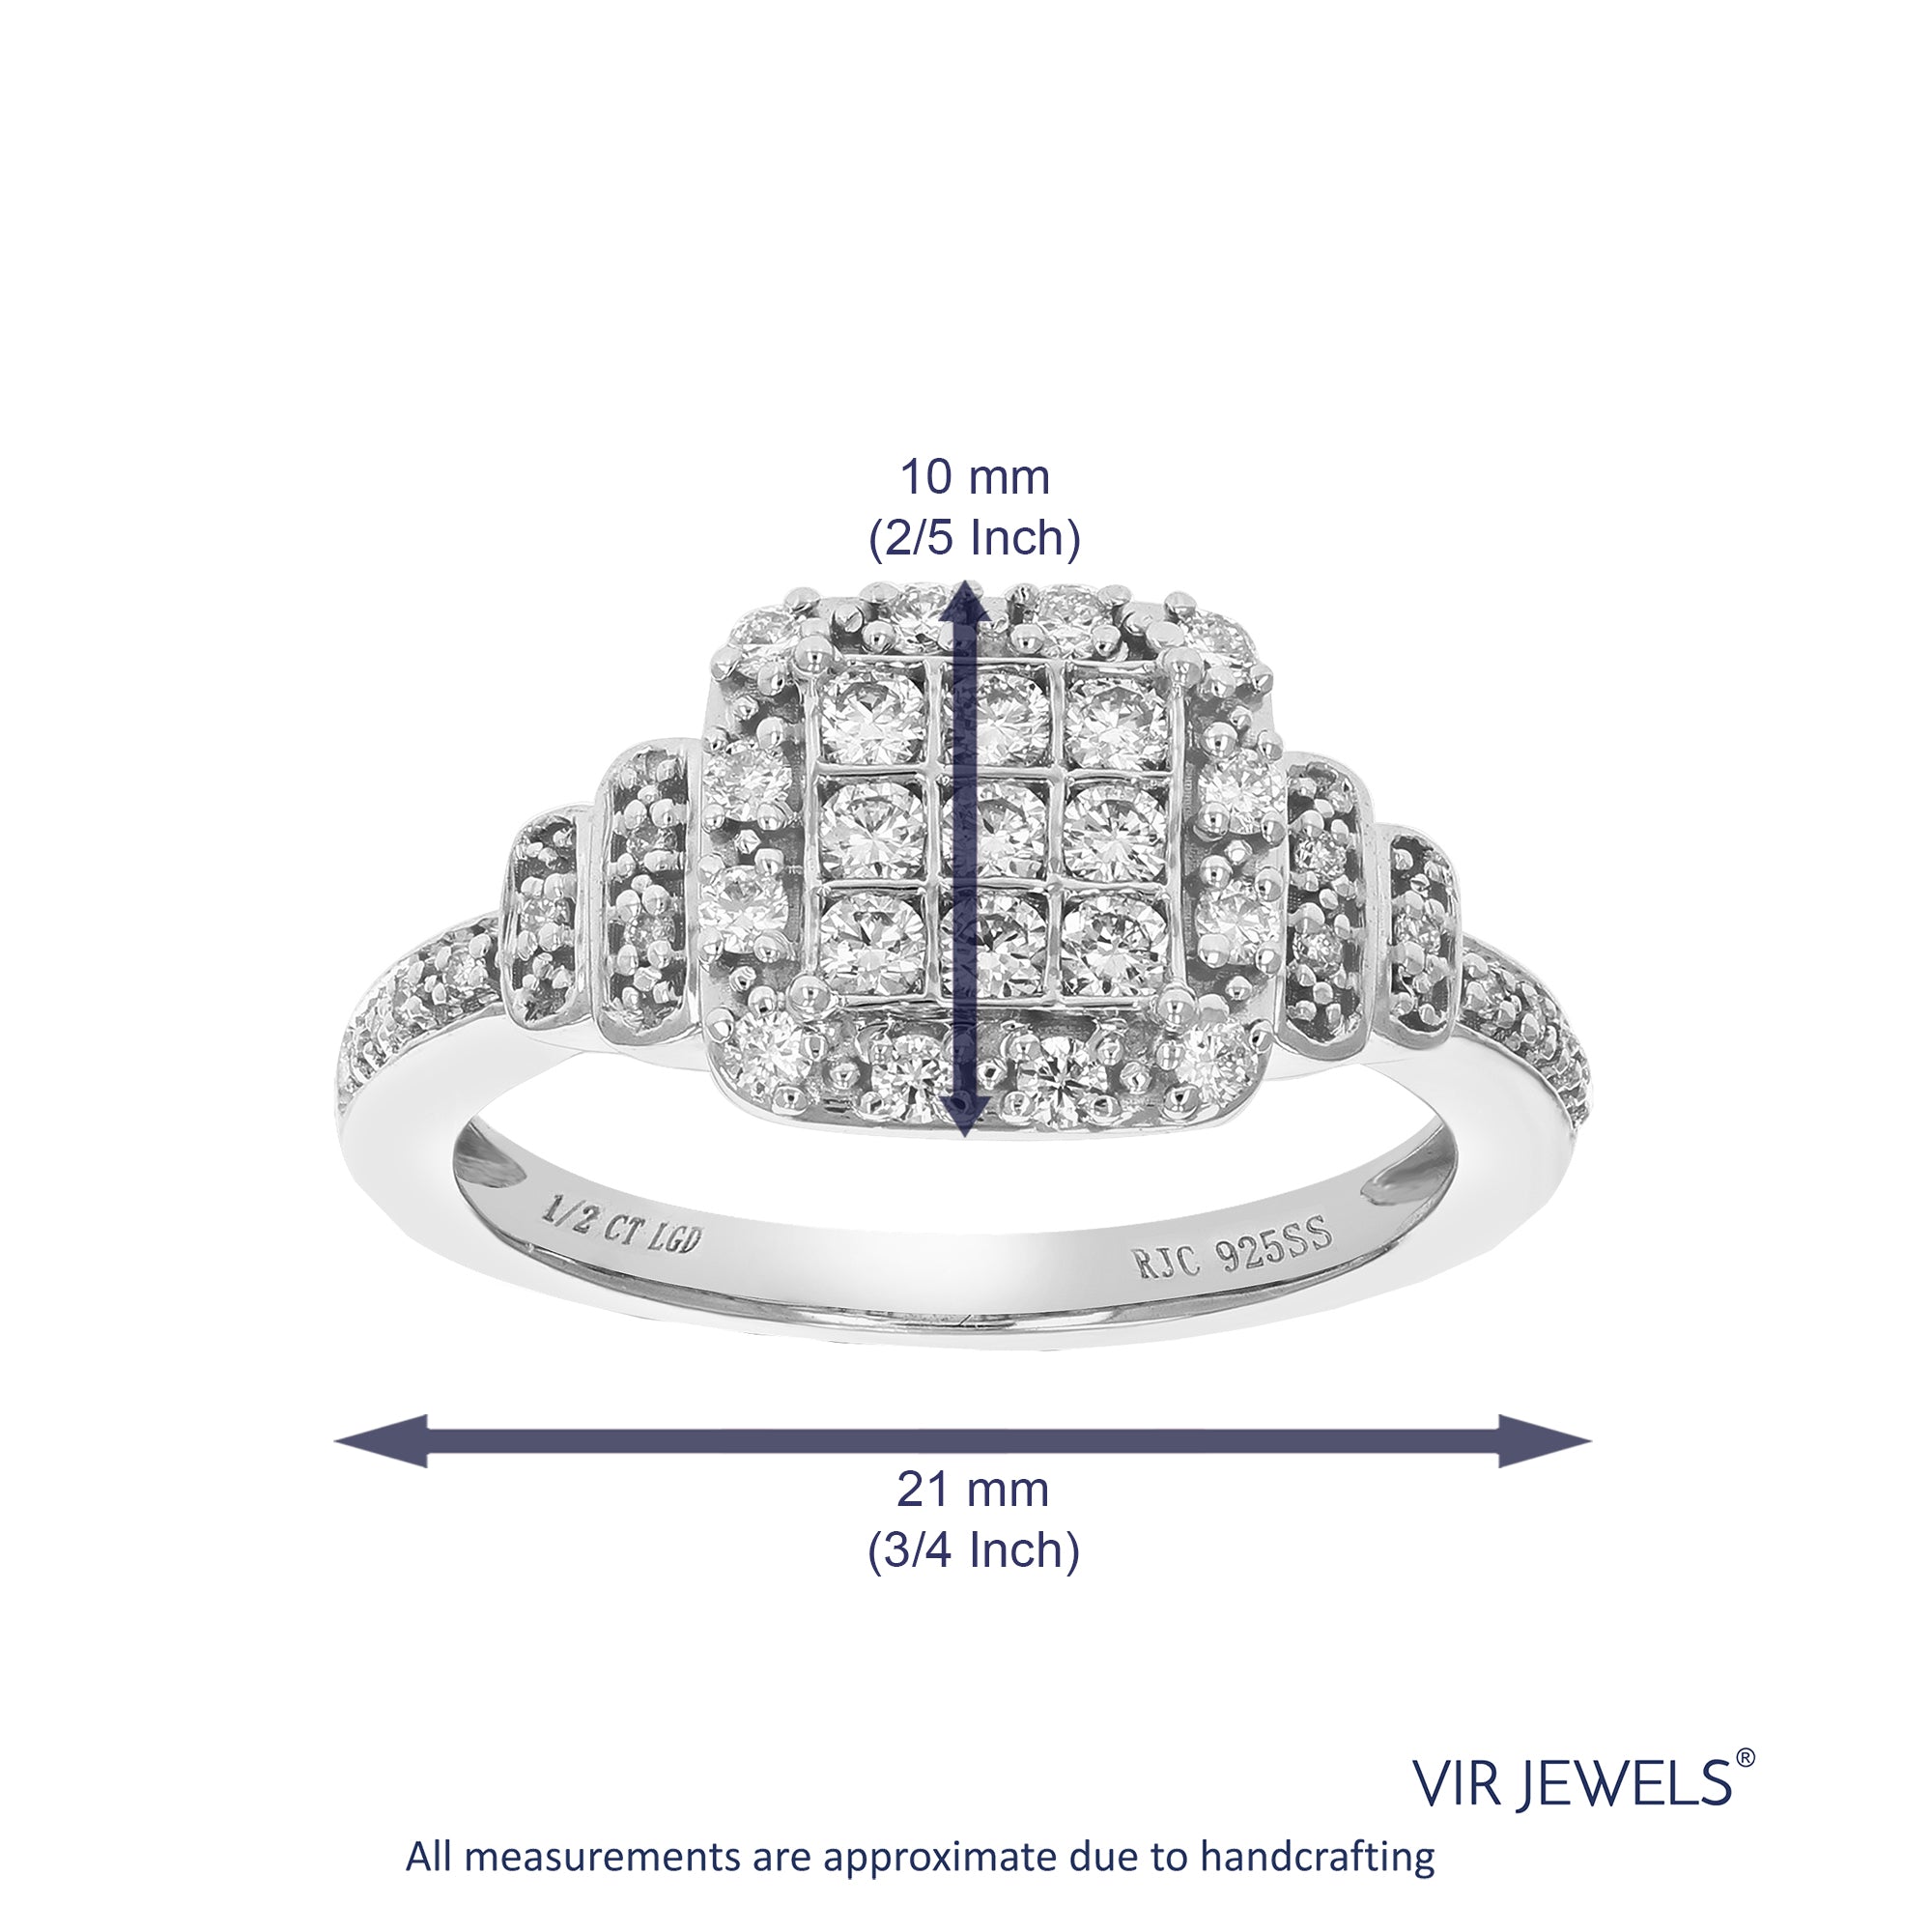 1/2 cttw Round Cut Lab Grown Diamond Engagement Ring 35 Stones .925 Sterling Silver Prong Set